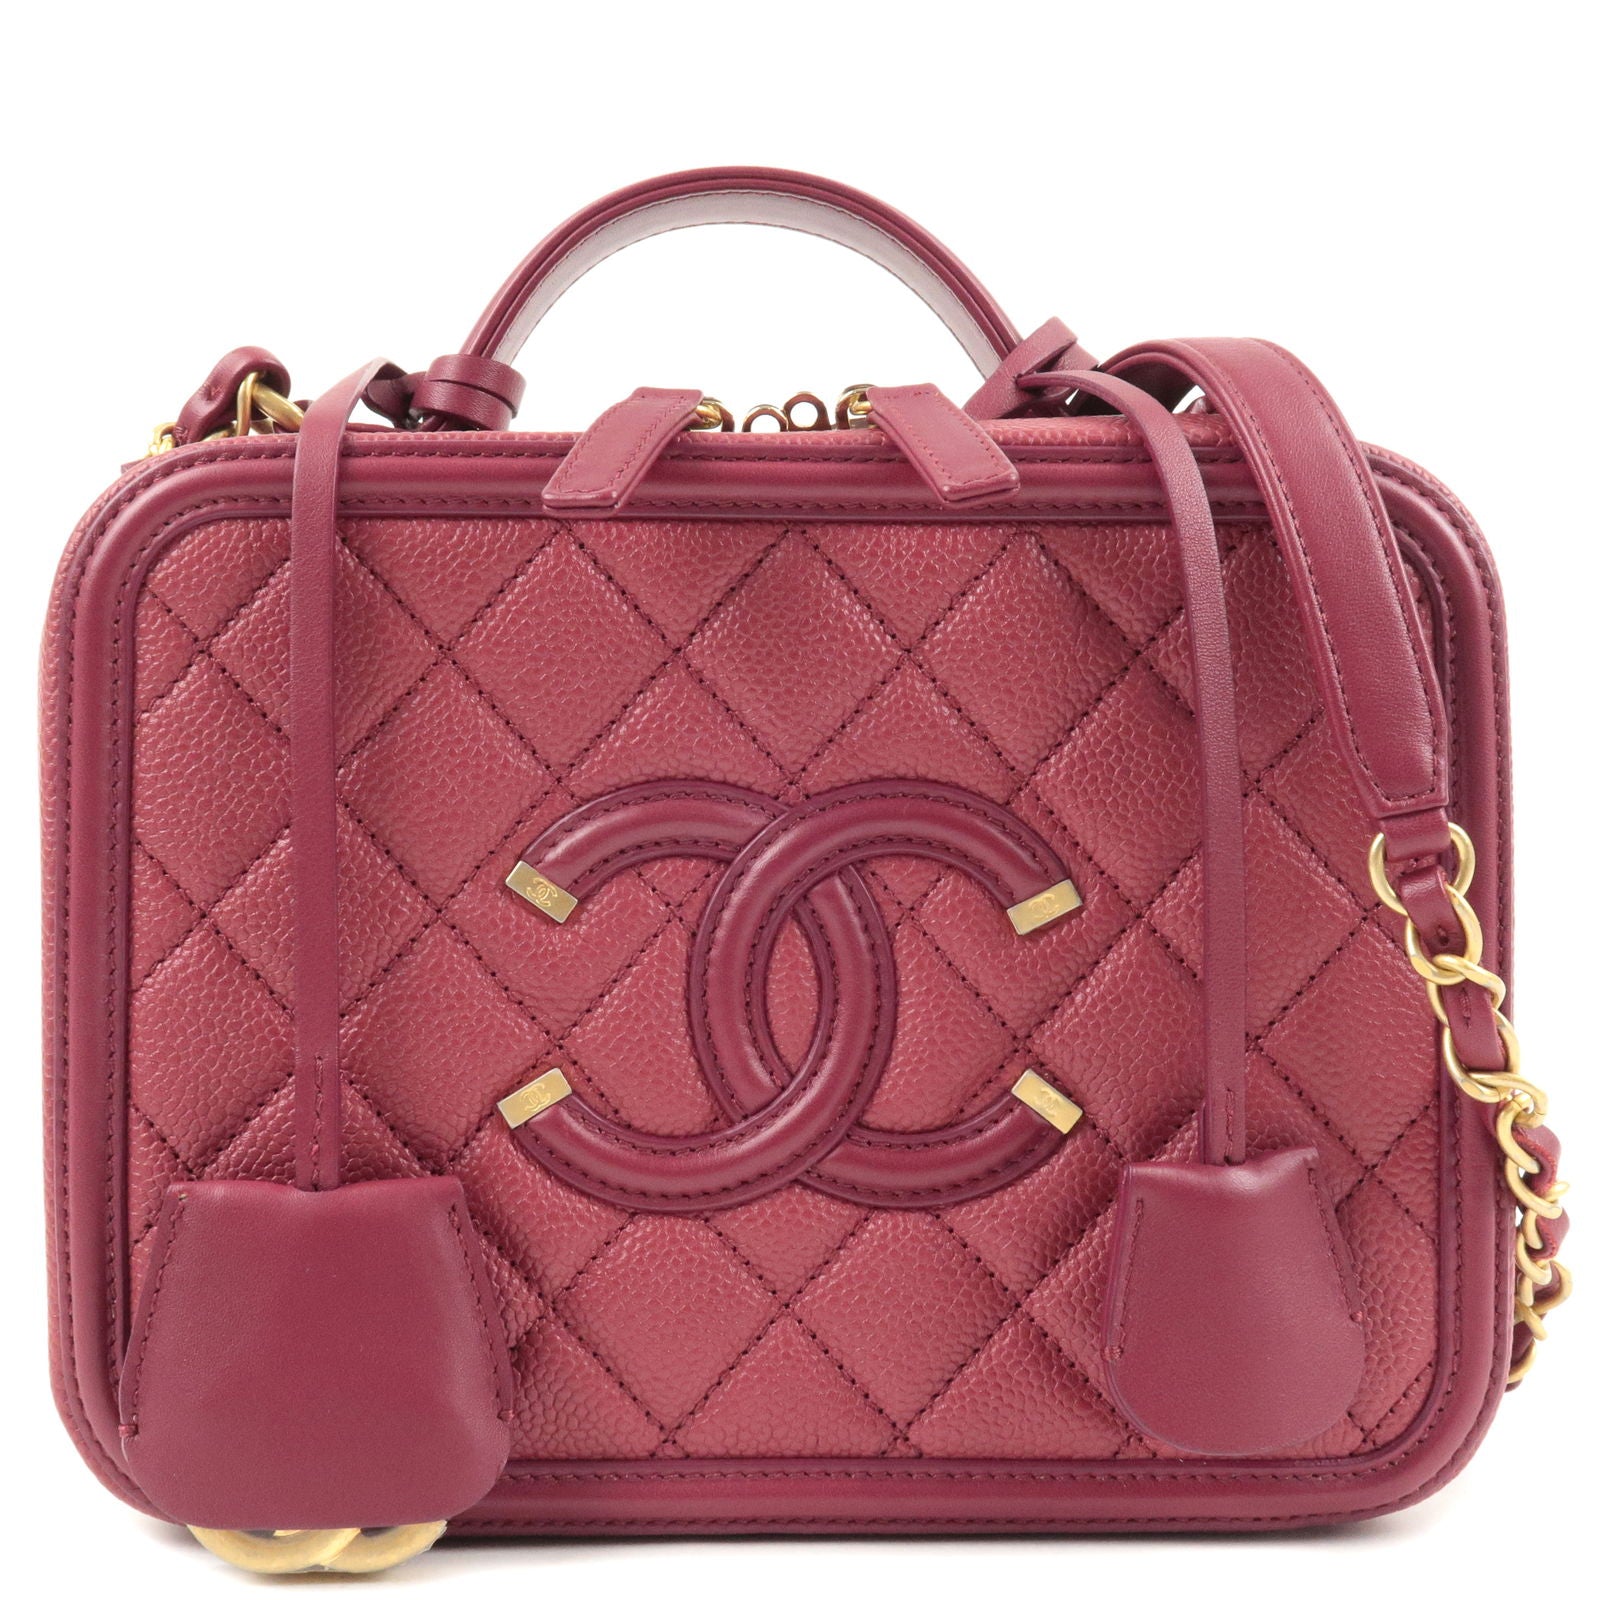 Chanel Red Quilted Caviar Leather Small CC Filigree Vanity Case Bag Chanel